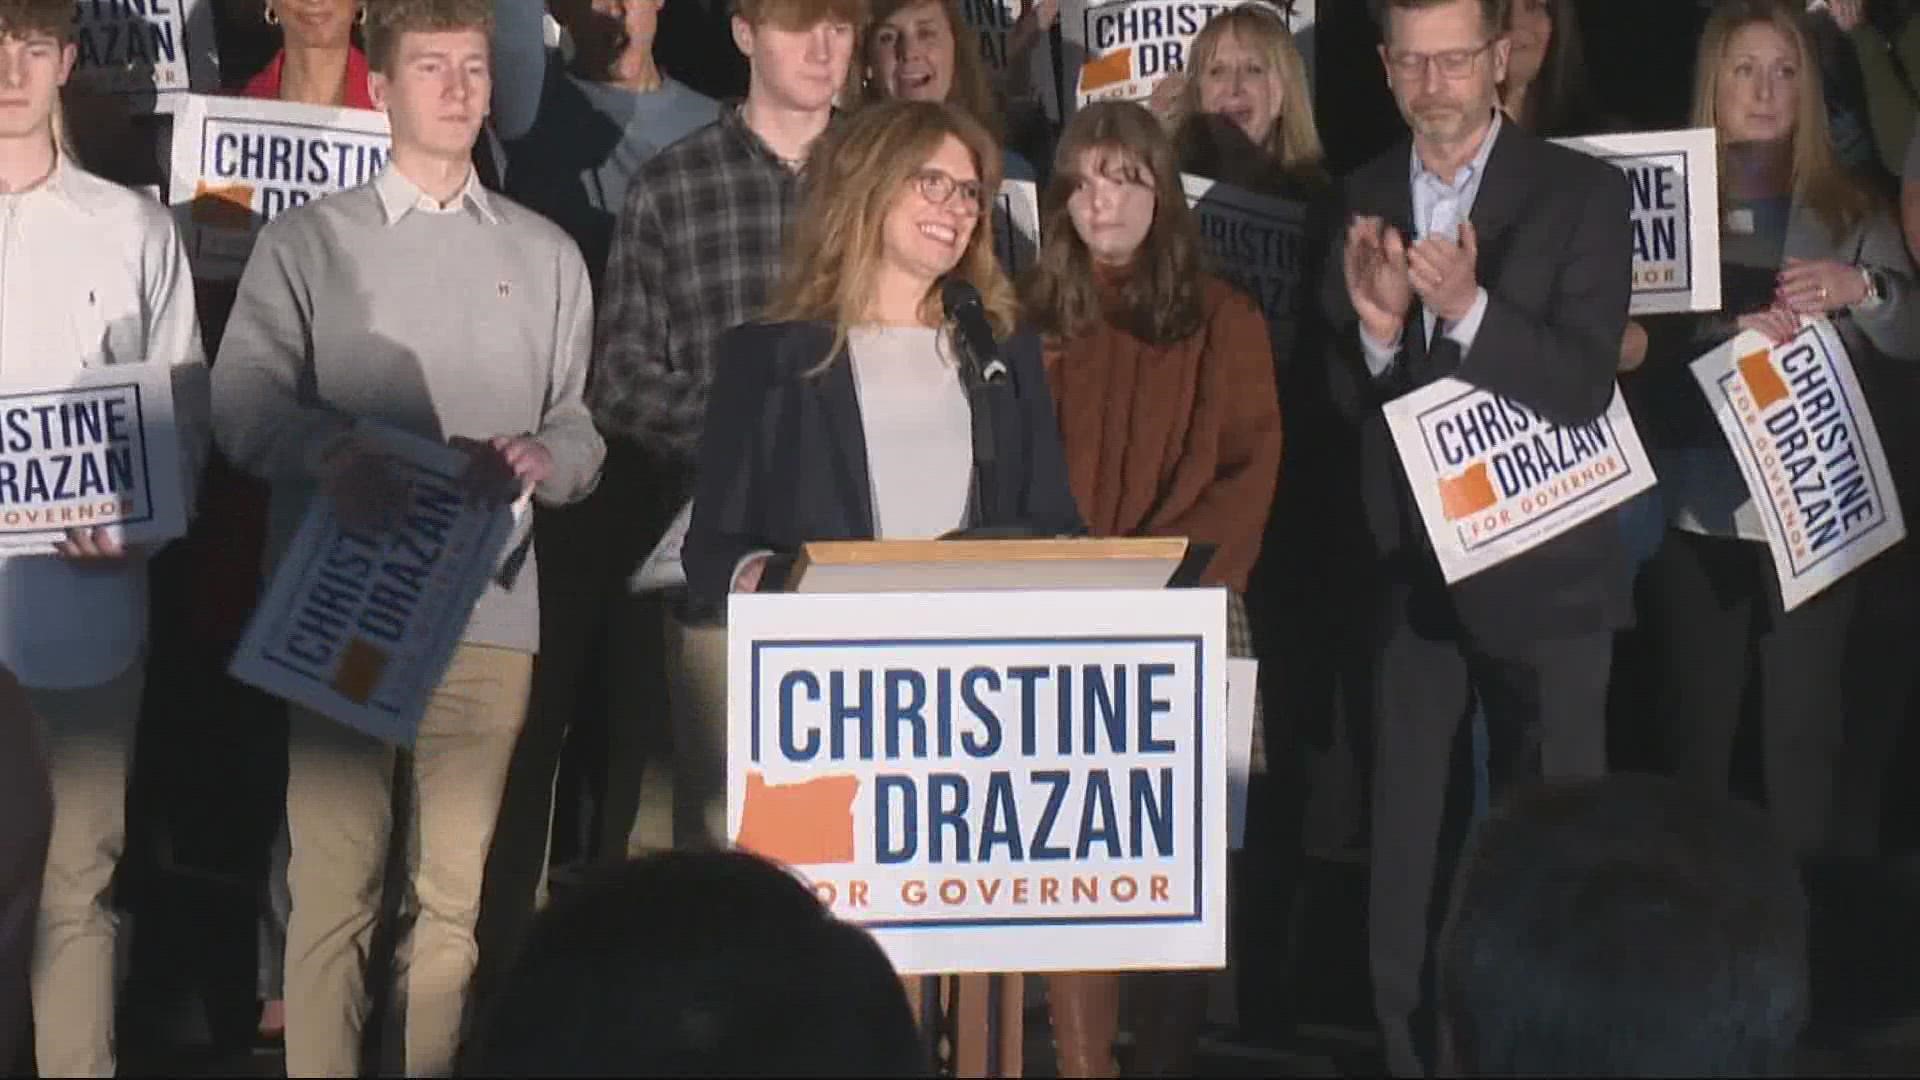 At her campaign kickoff, Drazan said she would clean up Portland, support police and get tough on crime and cut taxes for small businesses and families.